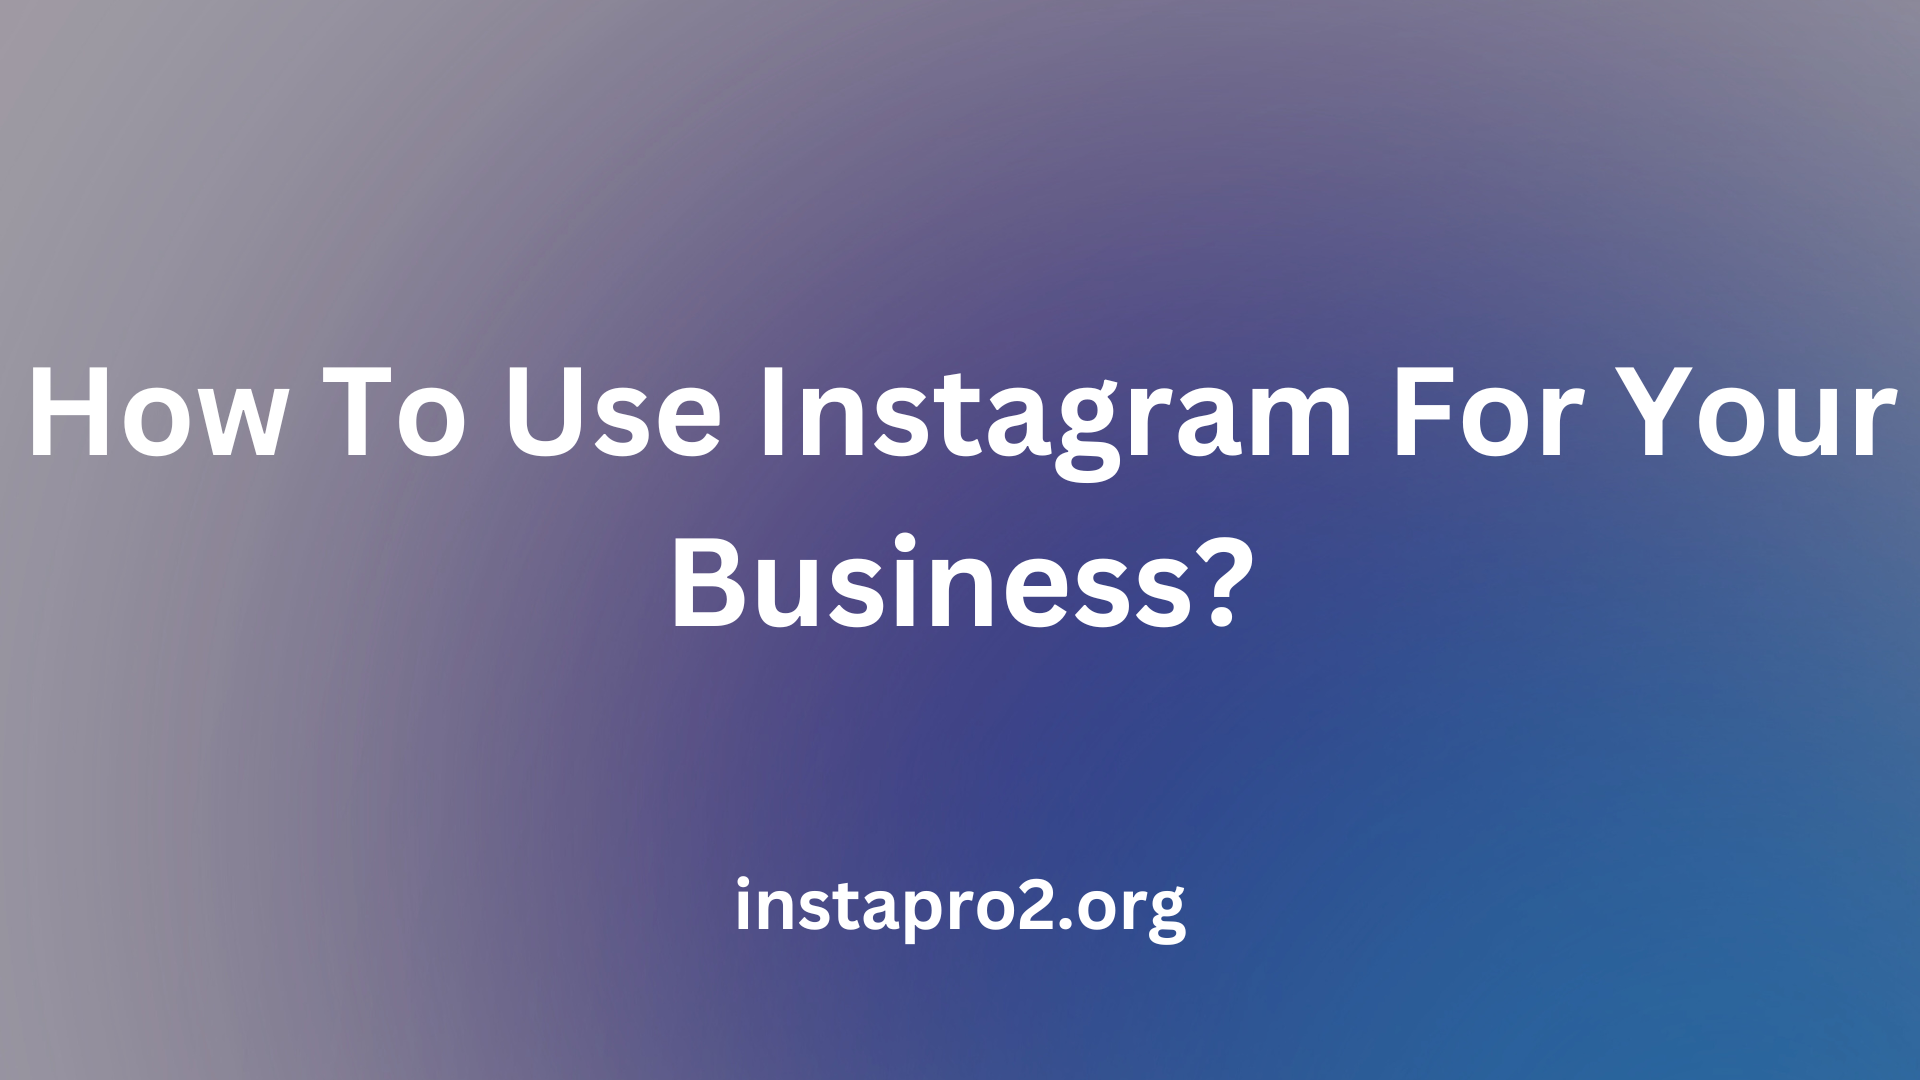 How To Use Instagram For Your Business?